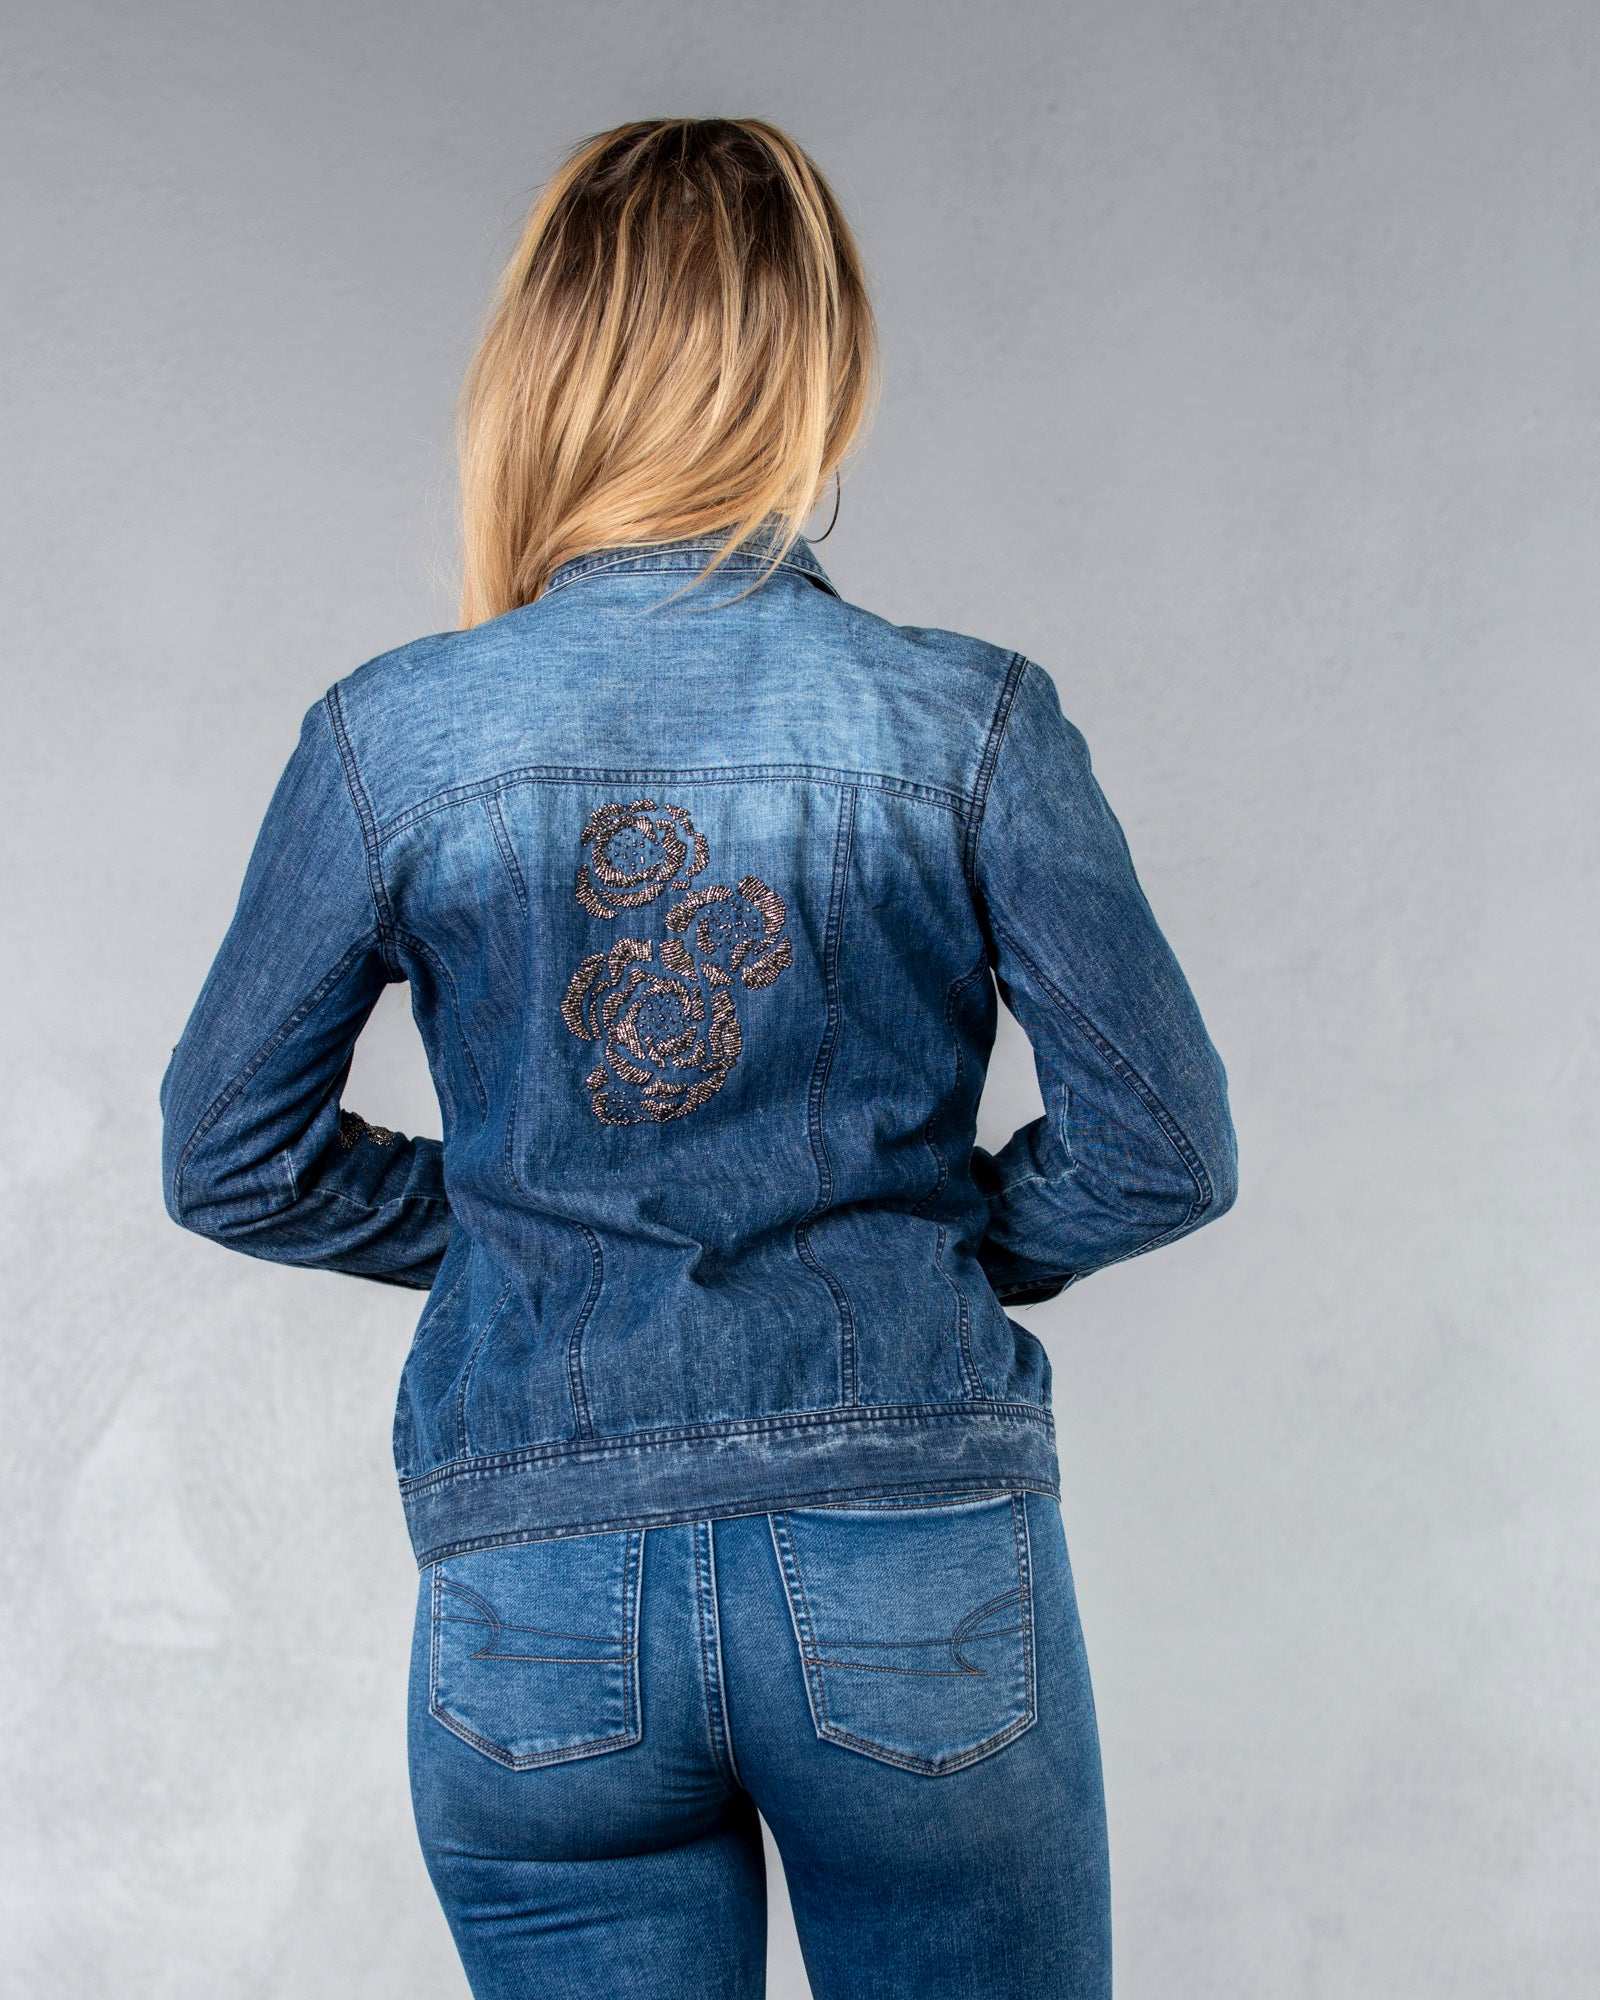 Time For A Change Denim Jacket by Vintage Collection